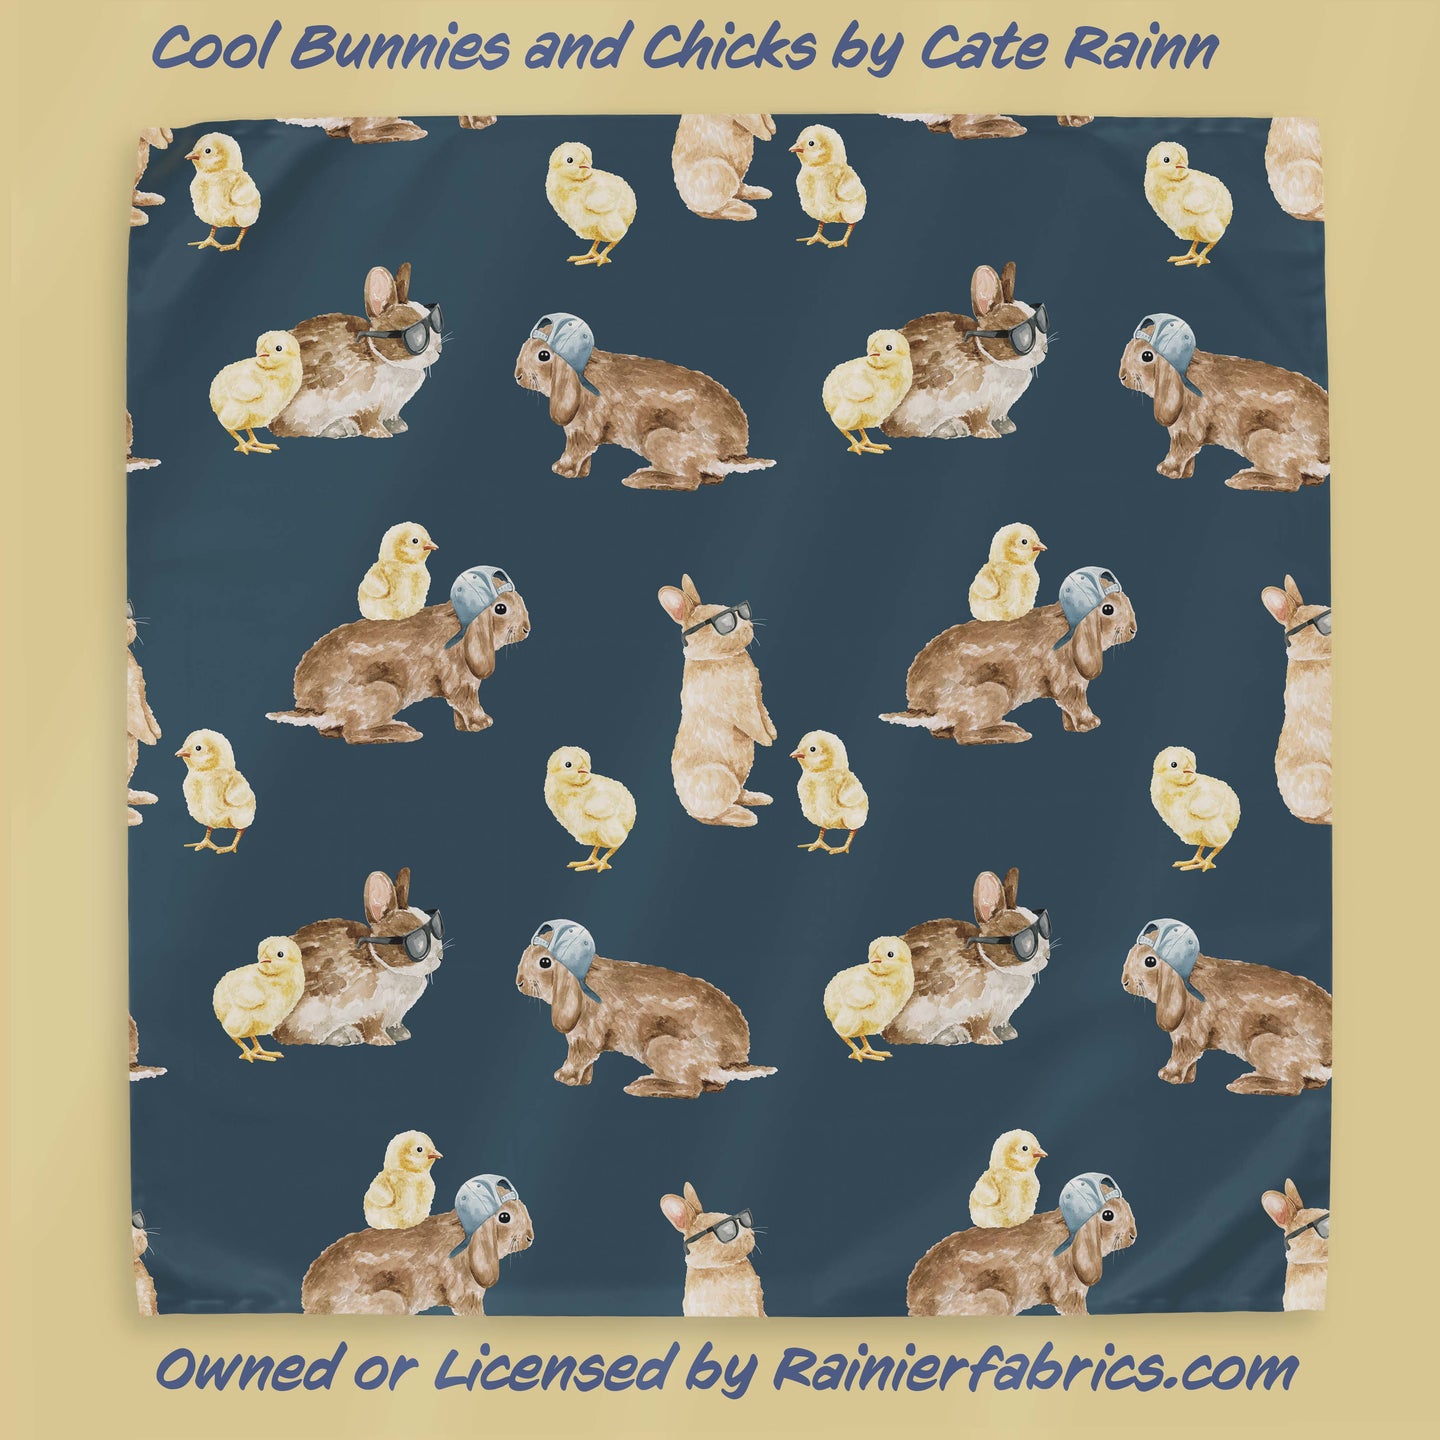 Cool Bunnies and Chicks by Cate & Rainn  - 2-5 day turnaround - Order by 1/2 yard; Description of bases below